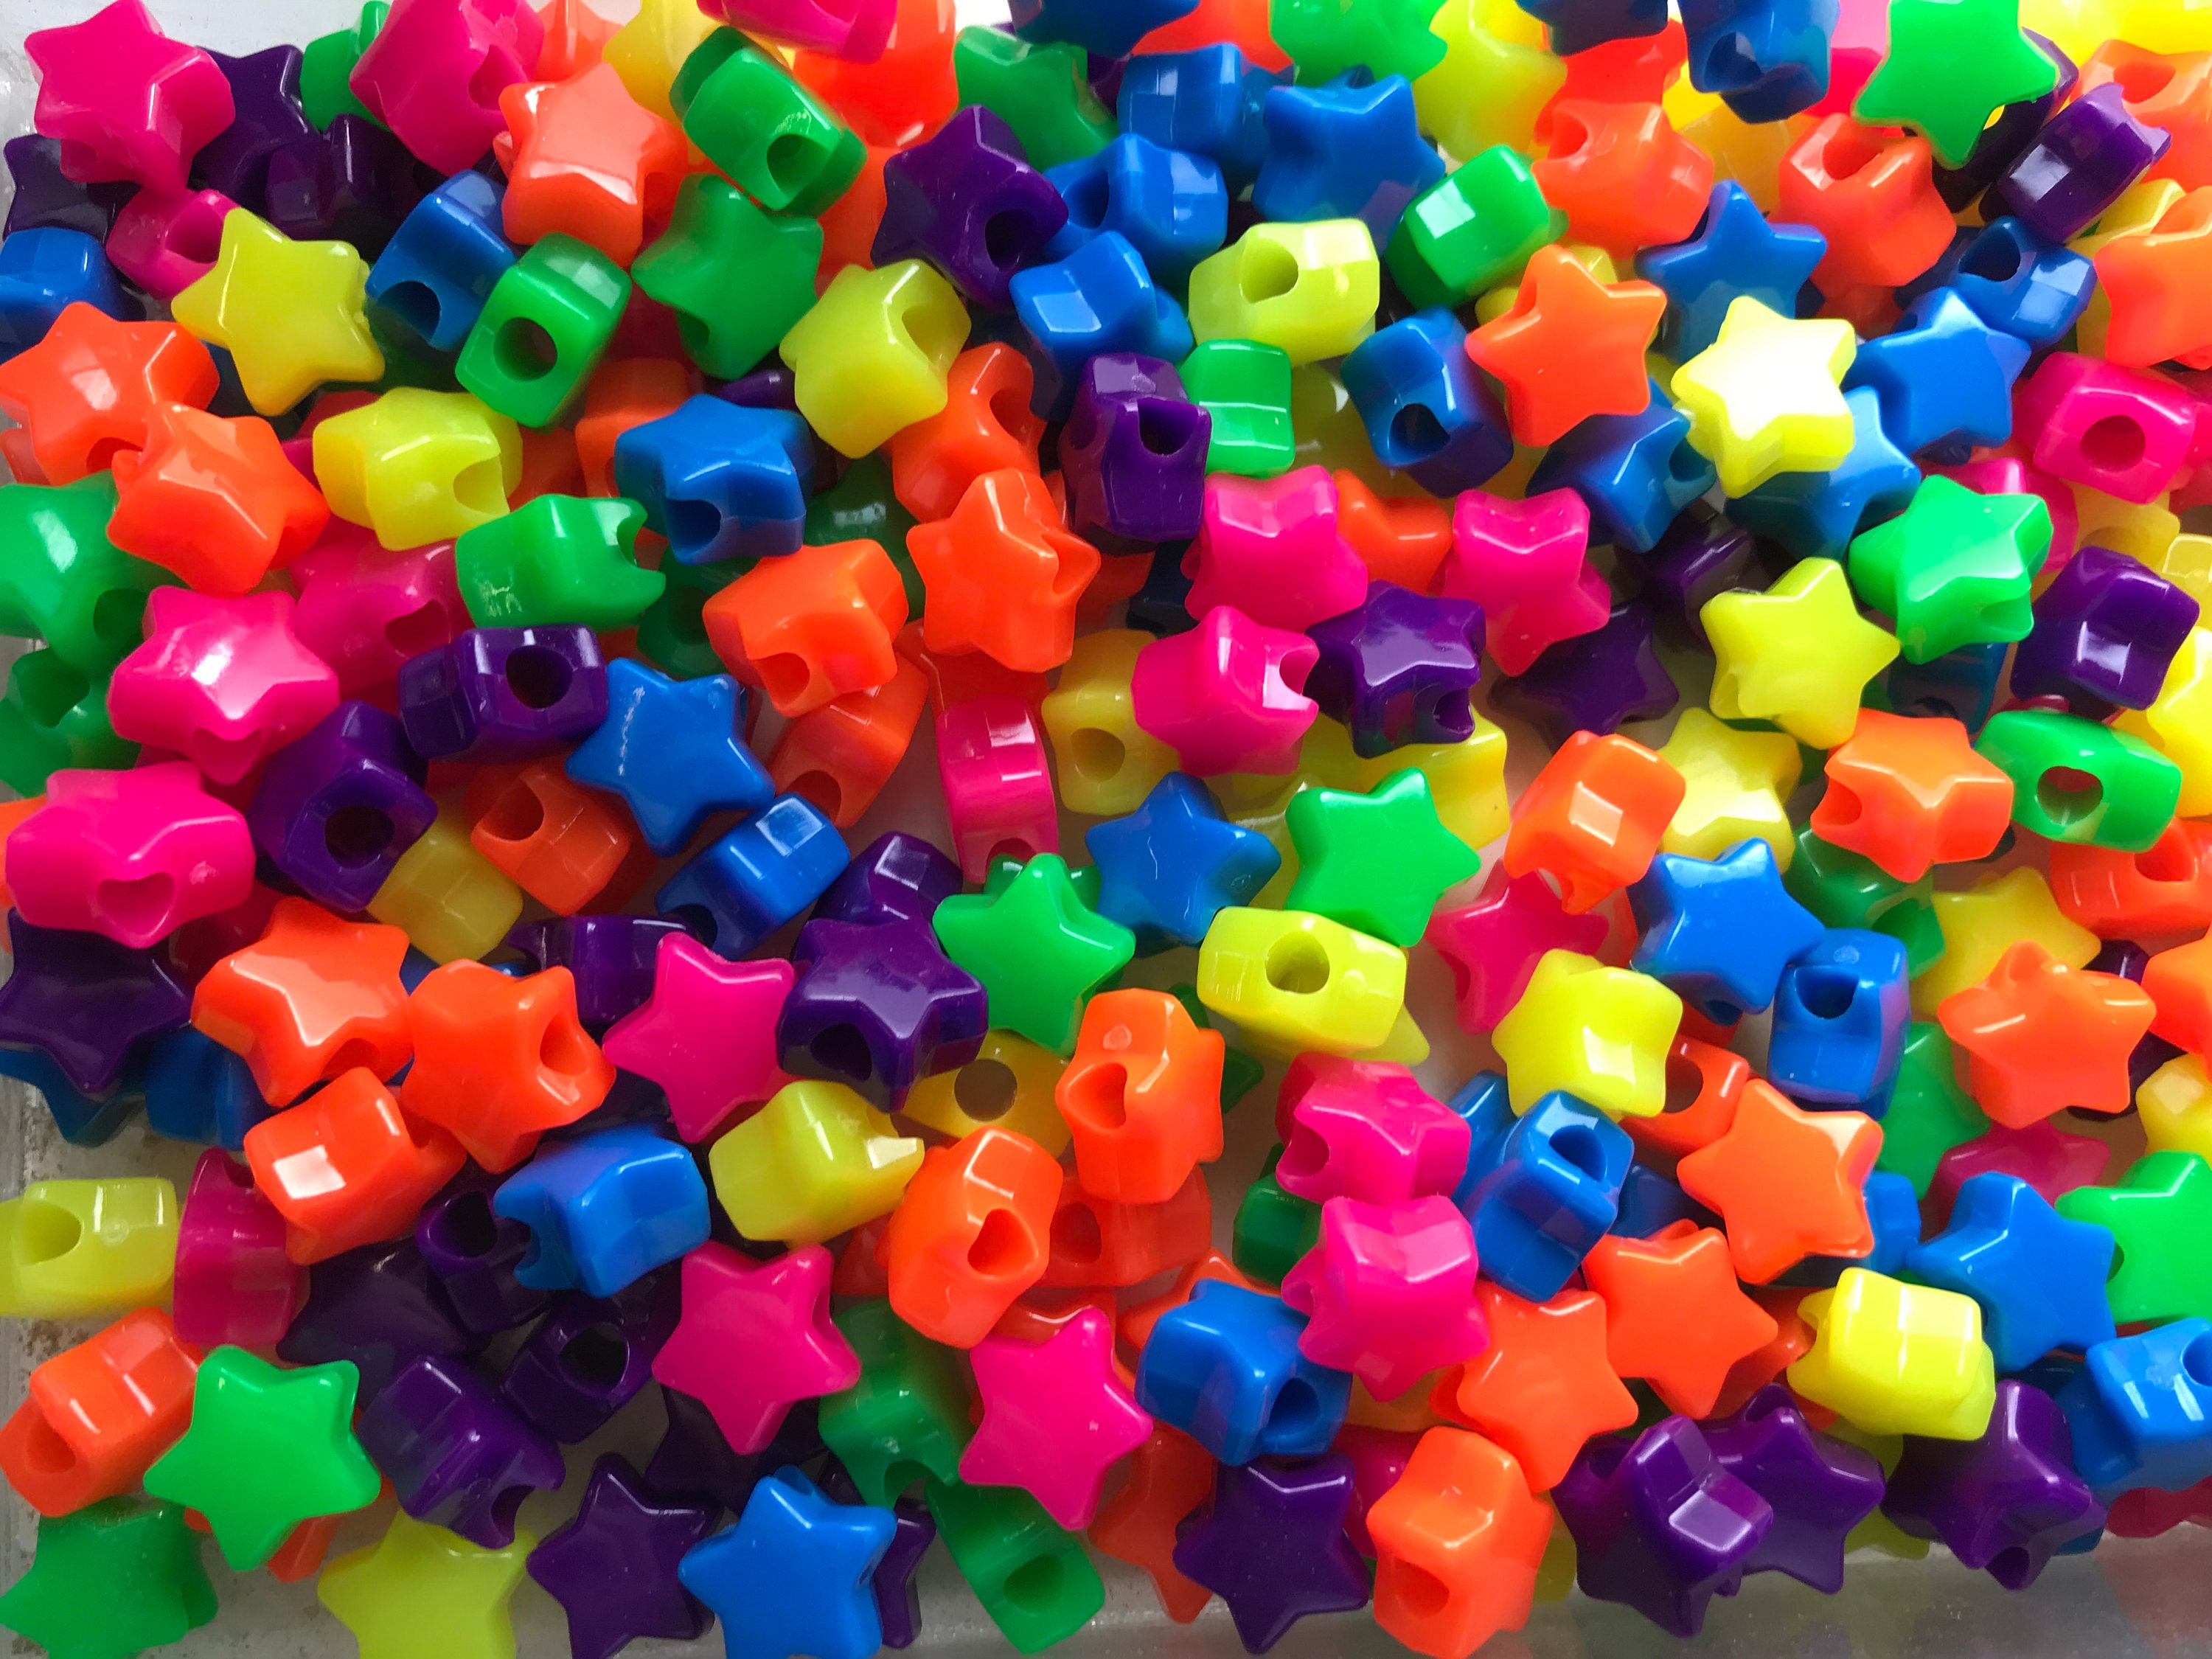 100 x Star Shaped Mixed Colour Pony Beads Jewelry Making Craft Plastic Dark  Opaque Mix